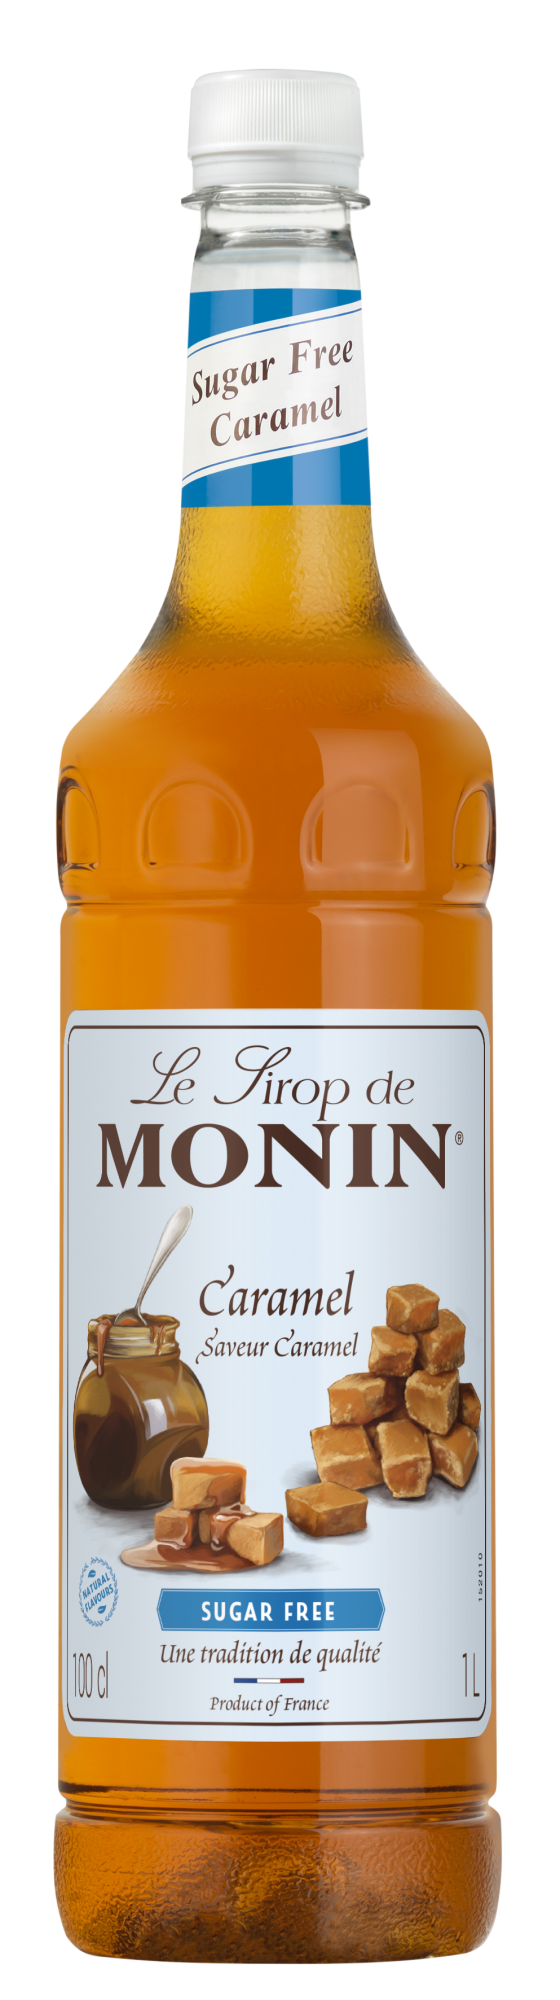 Buy Sugar Free MONIN Caramel syrup. It has been used in sweet treats for decades.